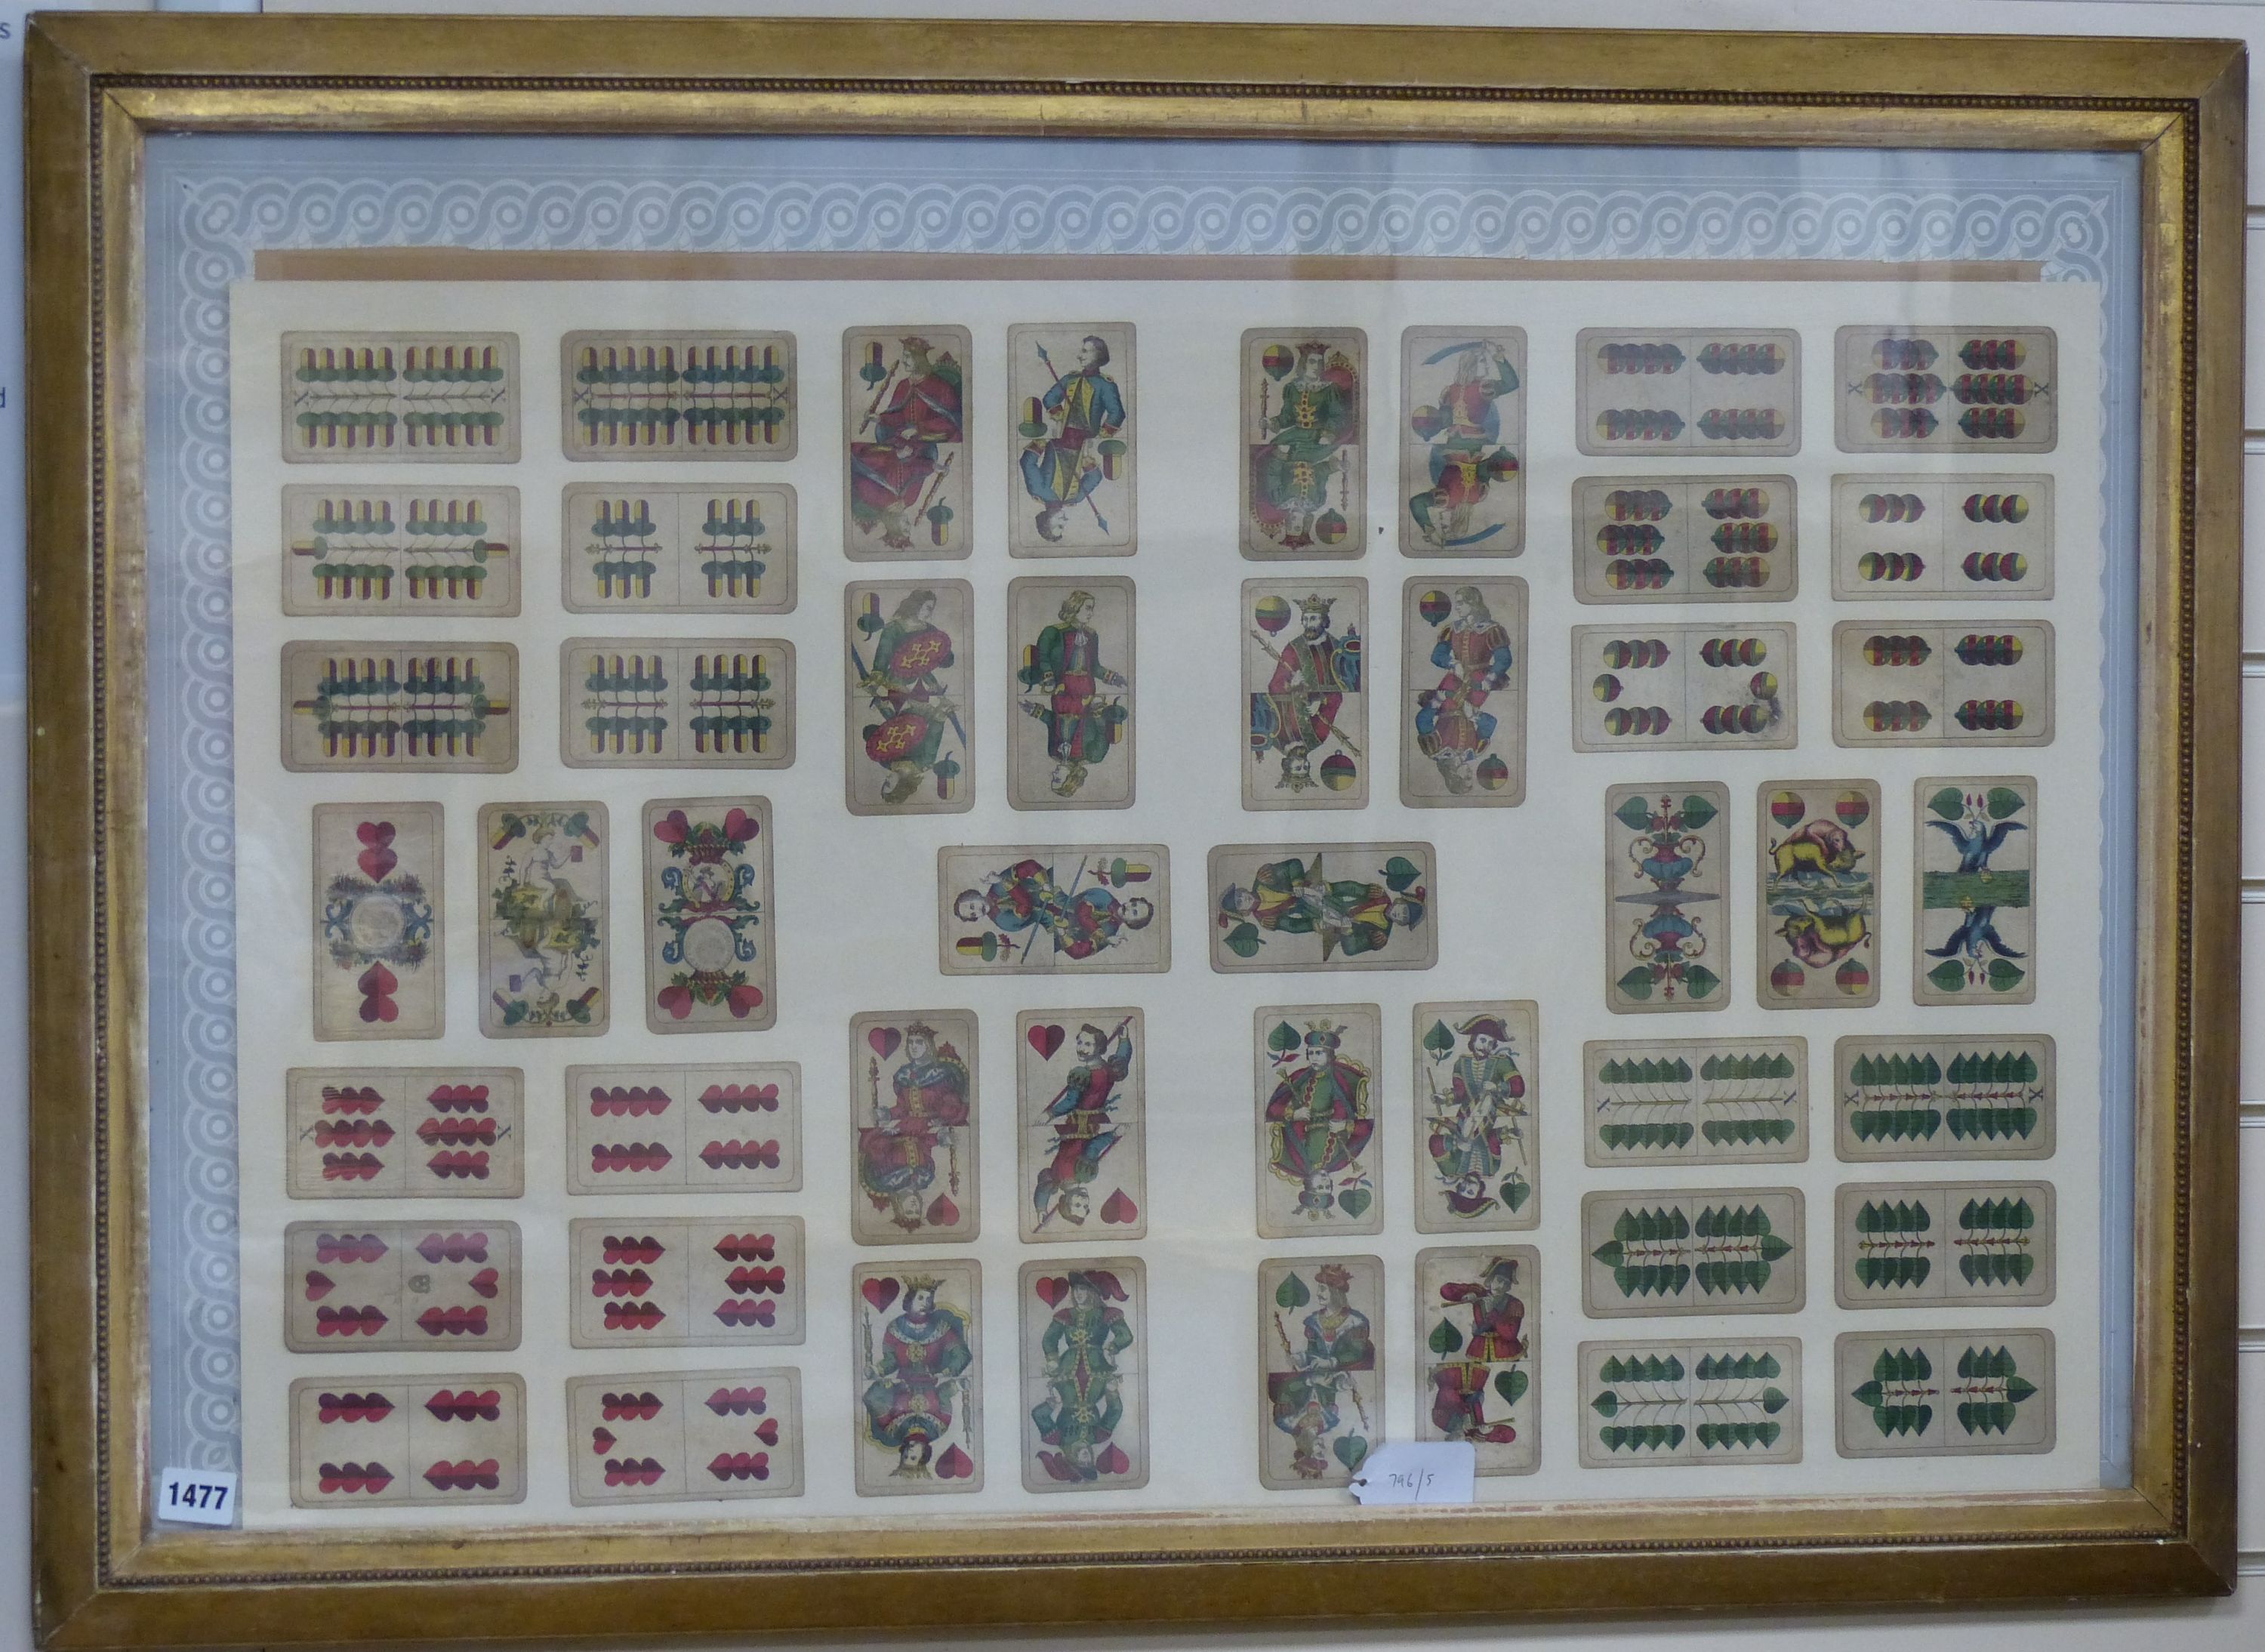 Framed 19th century playing cards